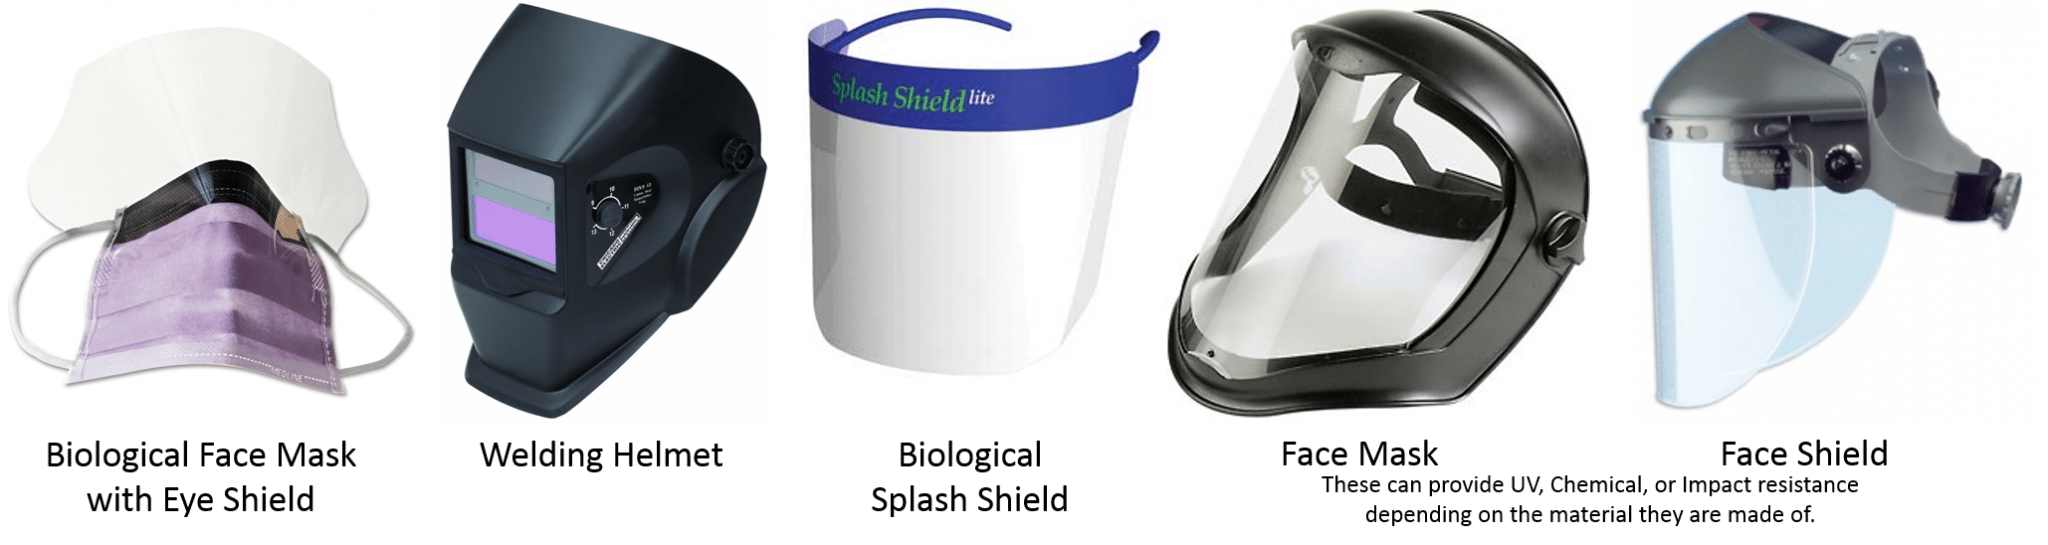 examples of different styles of face protection personal protective equipment